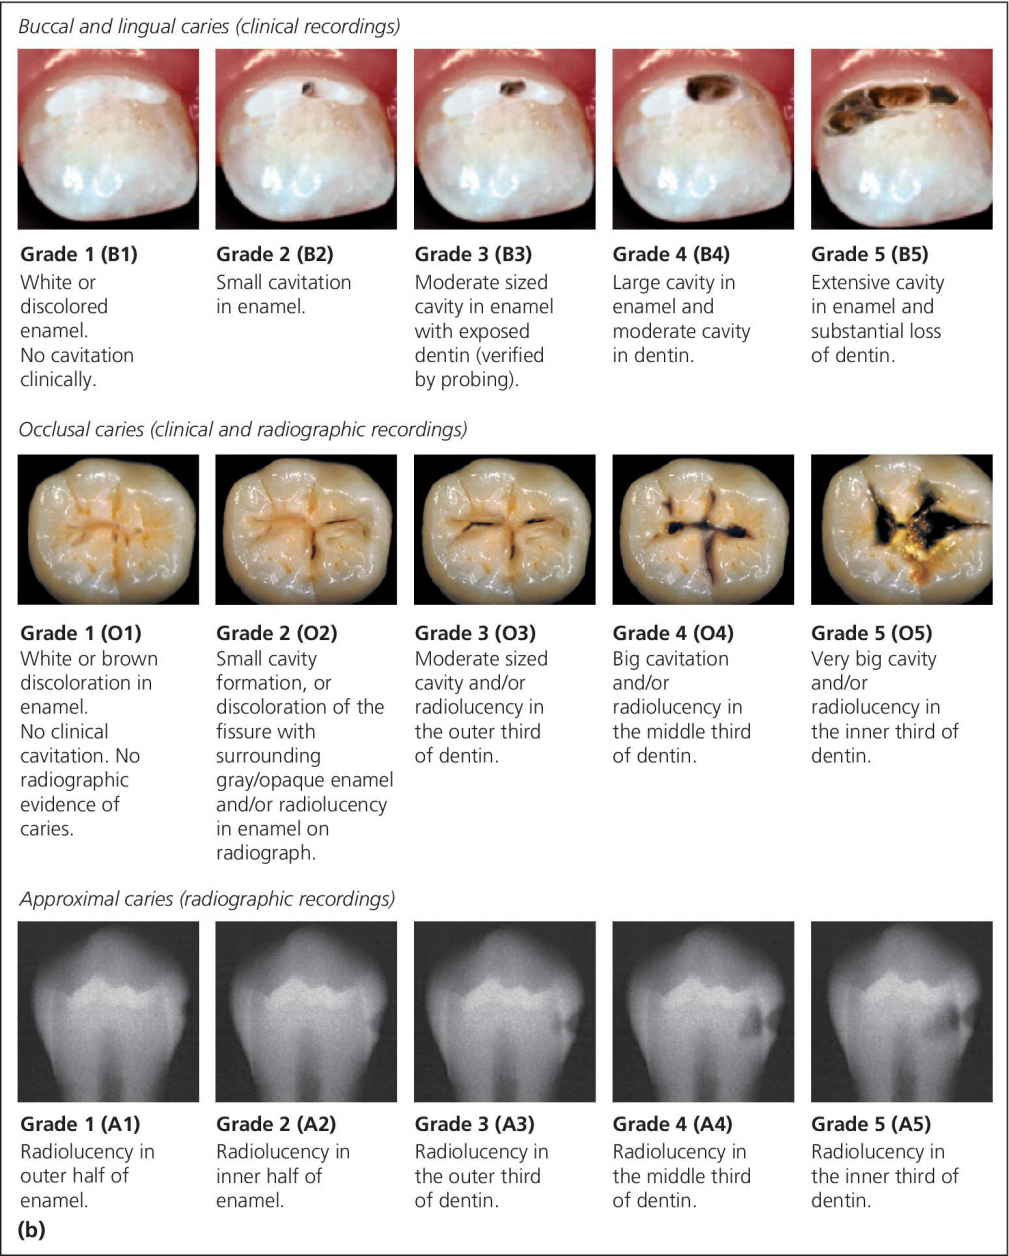 Two sets of photos and a set of radiographs of the teeth, depicting criteria using a five-graded scale for severity grading of caries on free smooth, occlusal, and approximal tooth surfaces.